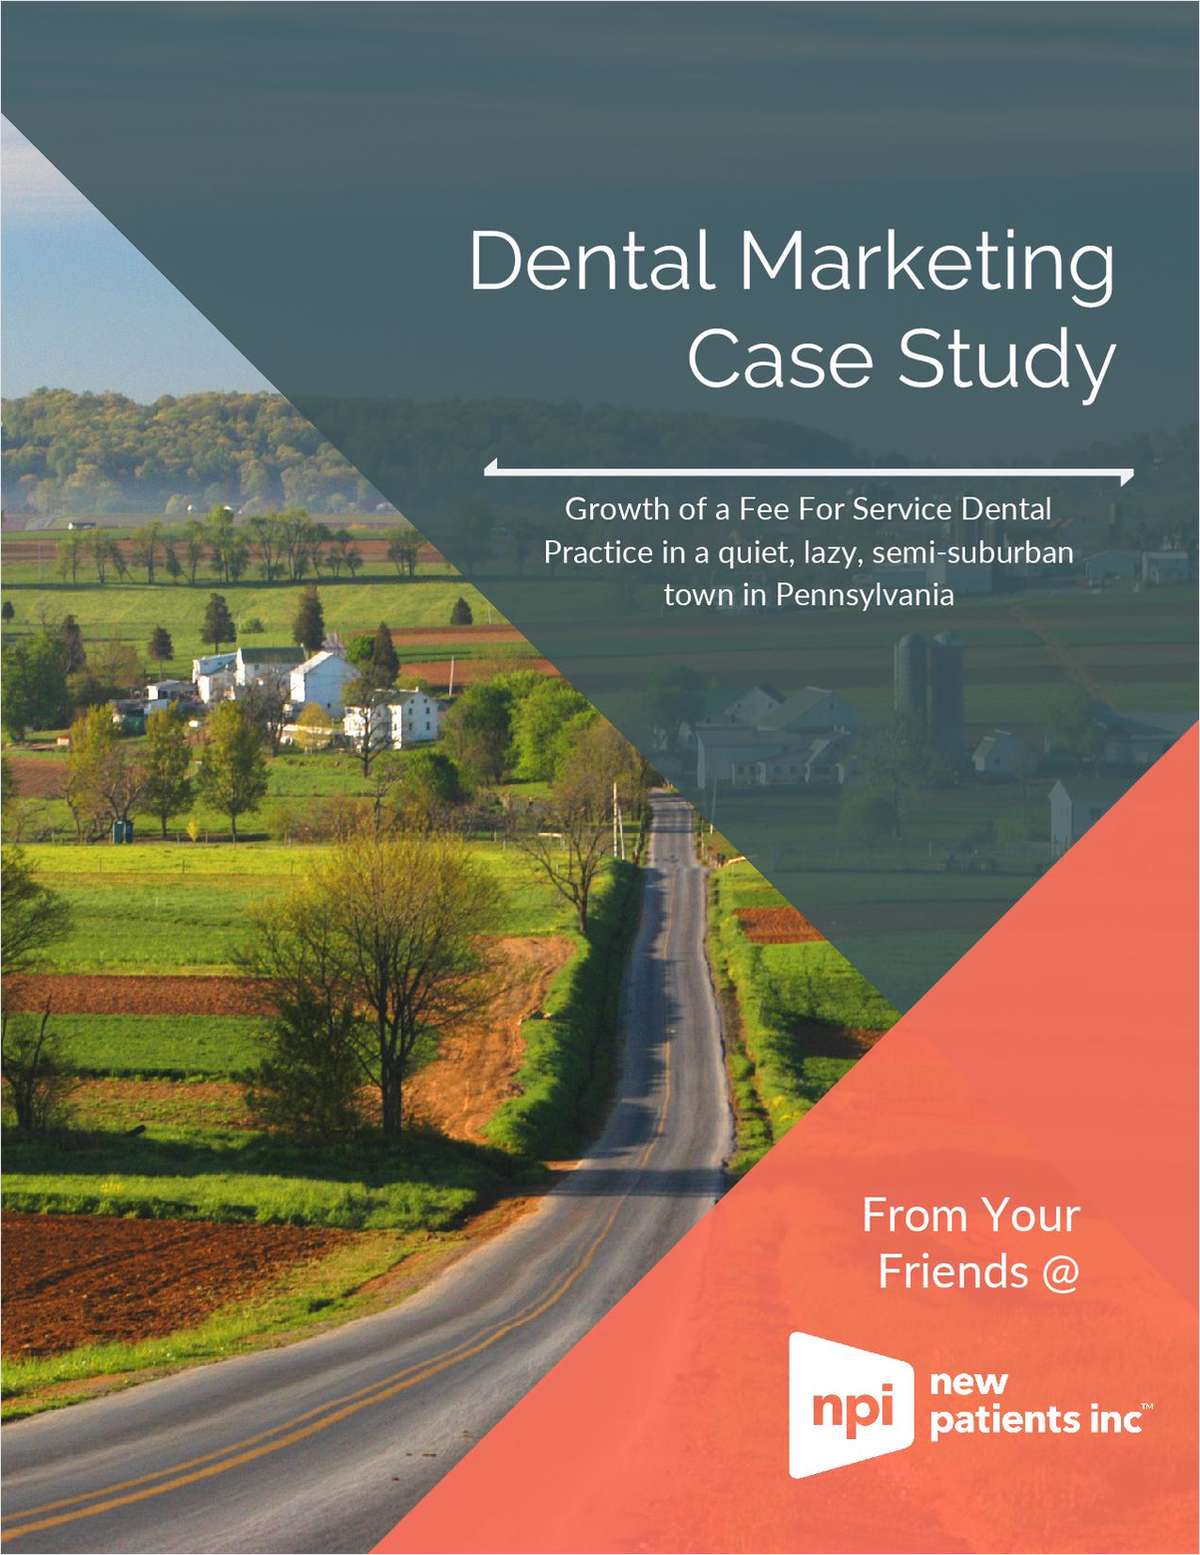 Growth of a fee for service dental practice in a quiet, lazy, semi-suburban town in Pennsylvania.